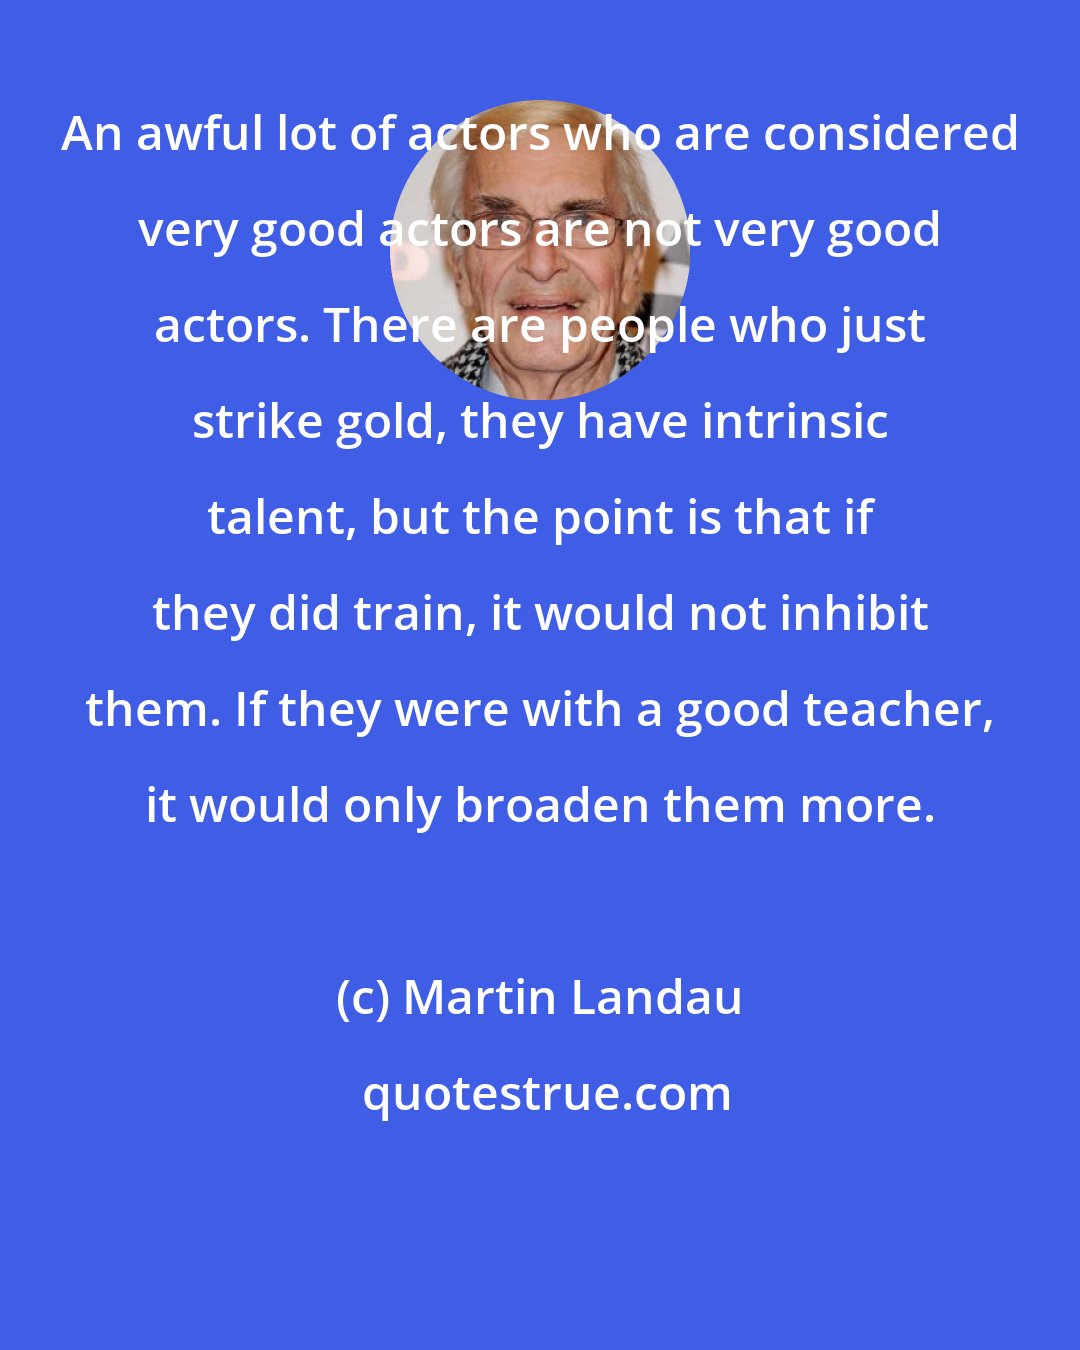 Martin Landau: An awful lot of actors who are considered very good actors are not very good actors. There are people who just strike gold, they have intrinsic talent, but the point is that if they did train, it would not inhibit them. If they were with a good teacher, it would only broaden them more.